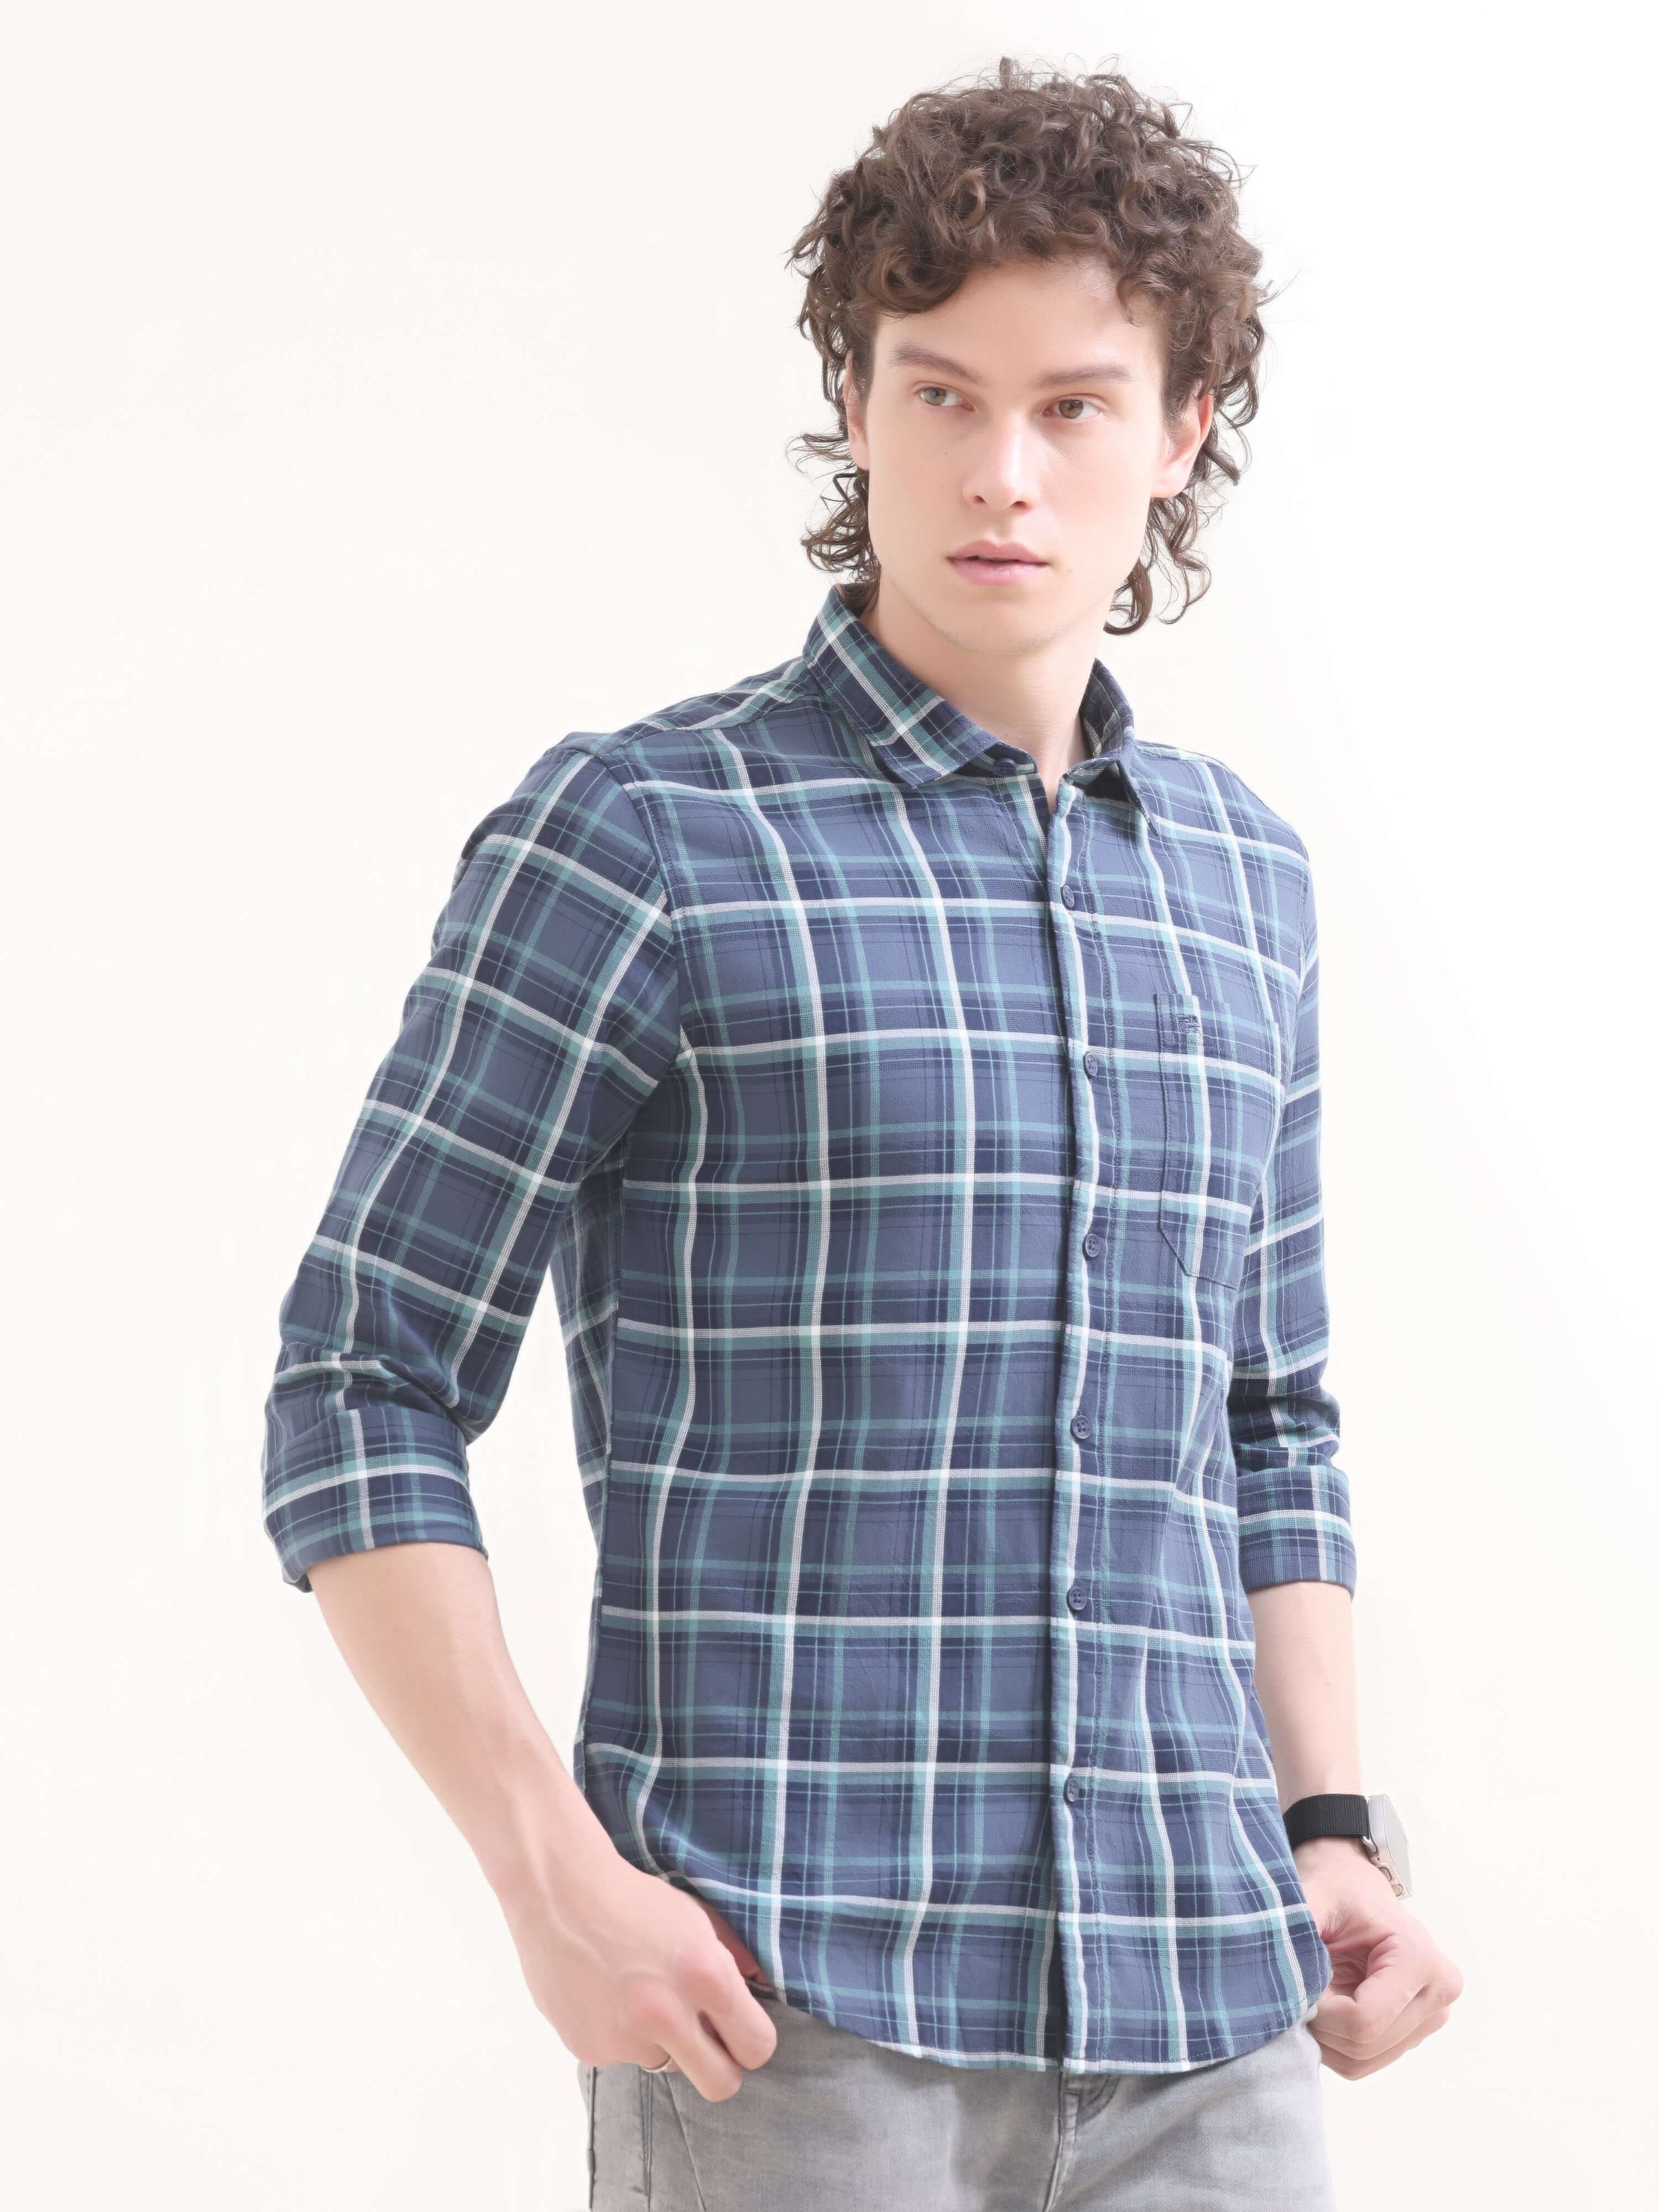 Eaton Blue Windowpane Check Shirt - Summer Style shop online at Estilocus. Elevate your look with the Eaton blue check shirt. Ideal for any summer event, our new arrival guarantees a sharp, casual sophistication.